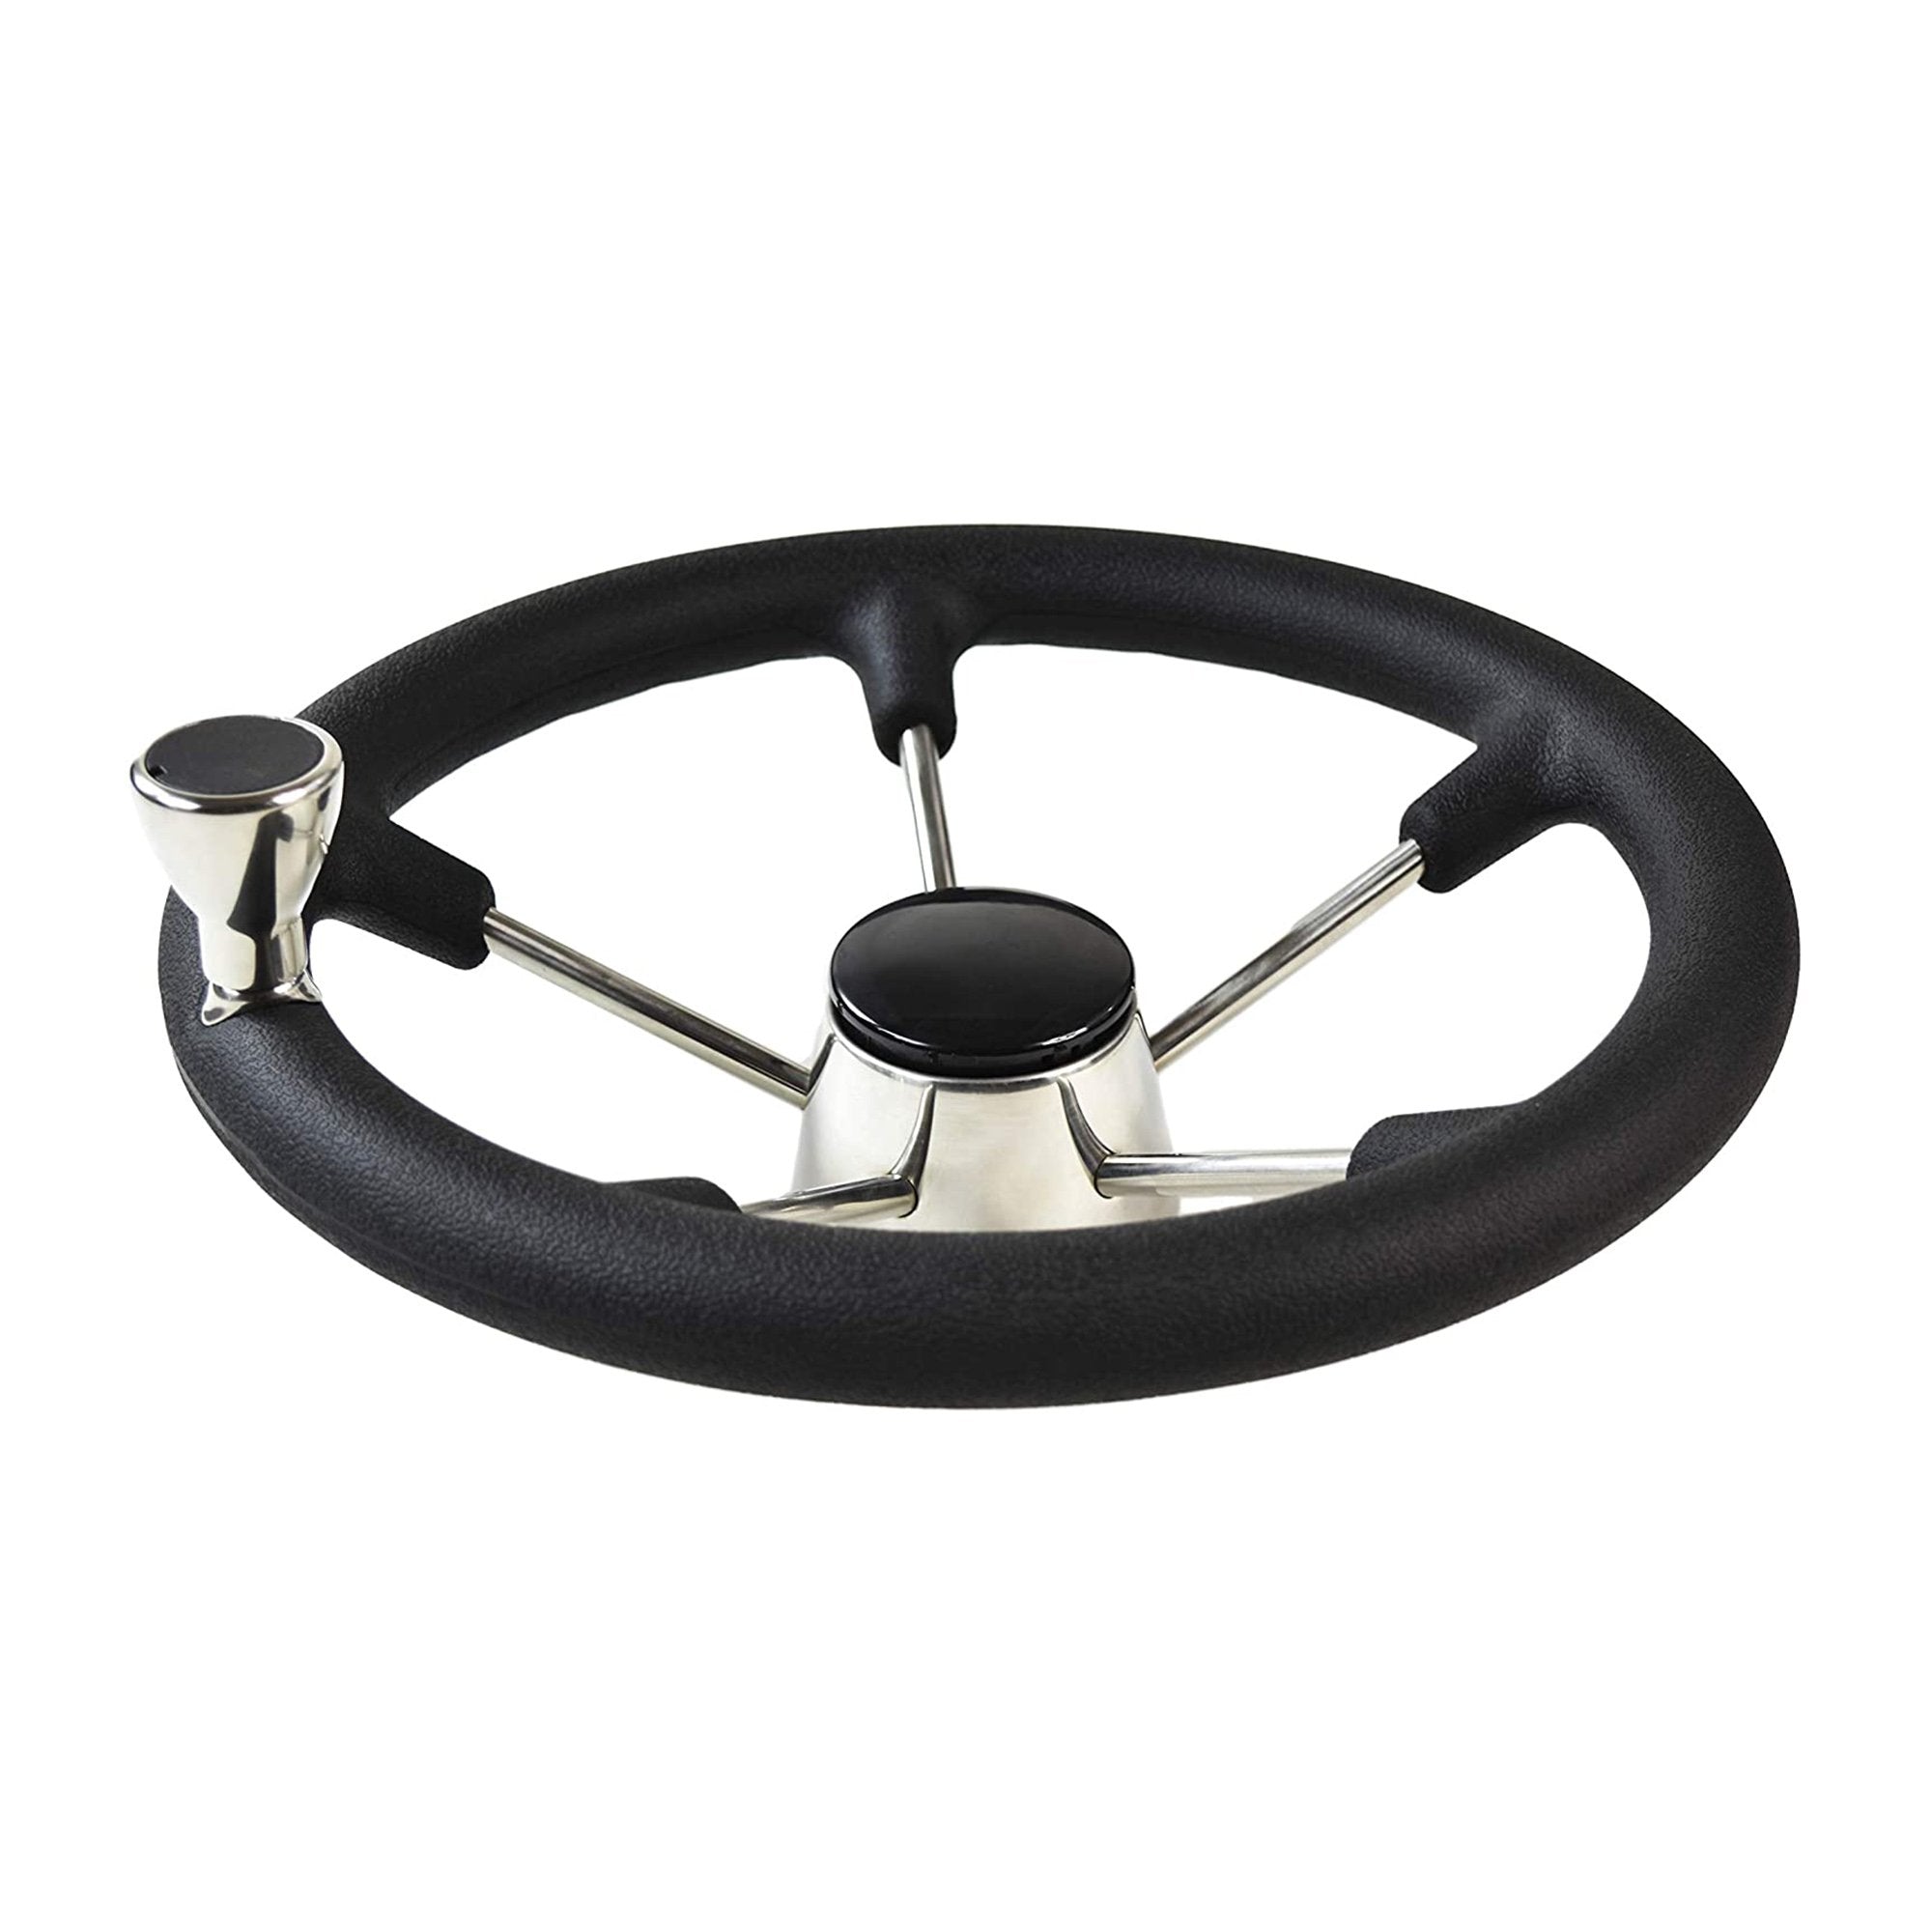 Marine City 13-1/2 inches Black Foam Grip Boat Stainless Steel Steering Wheel with Knob for Boat Yacht (Diameter: 13-1/2 inches)